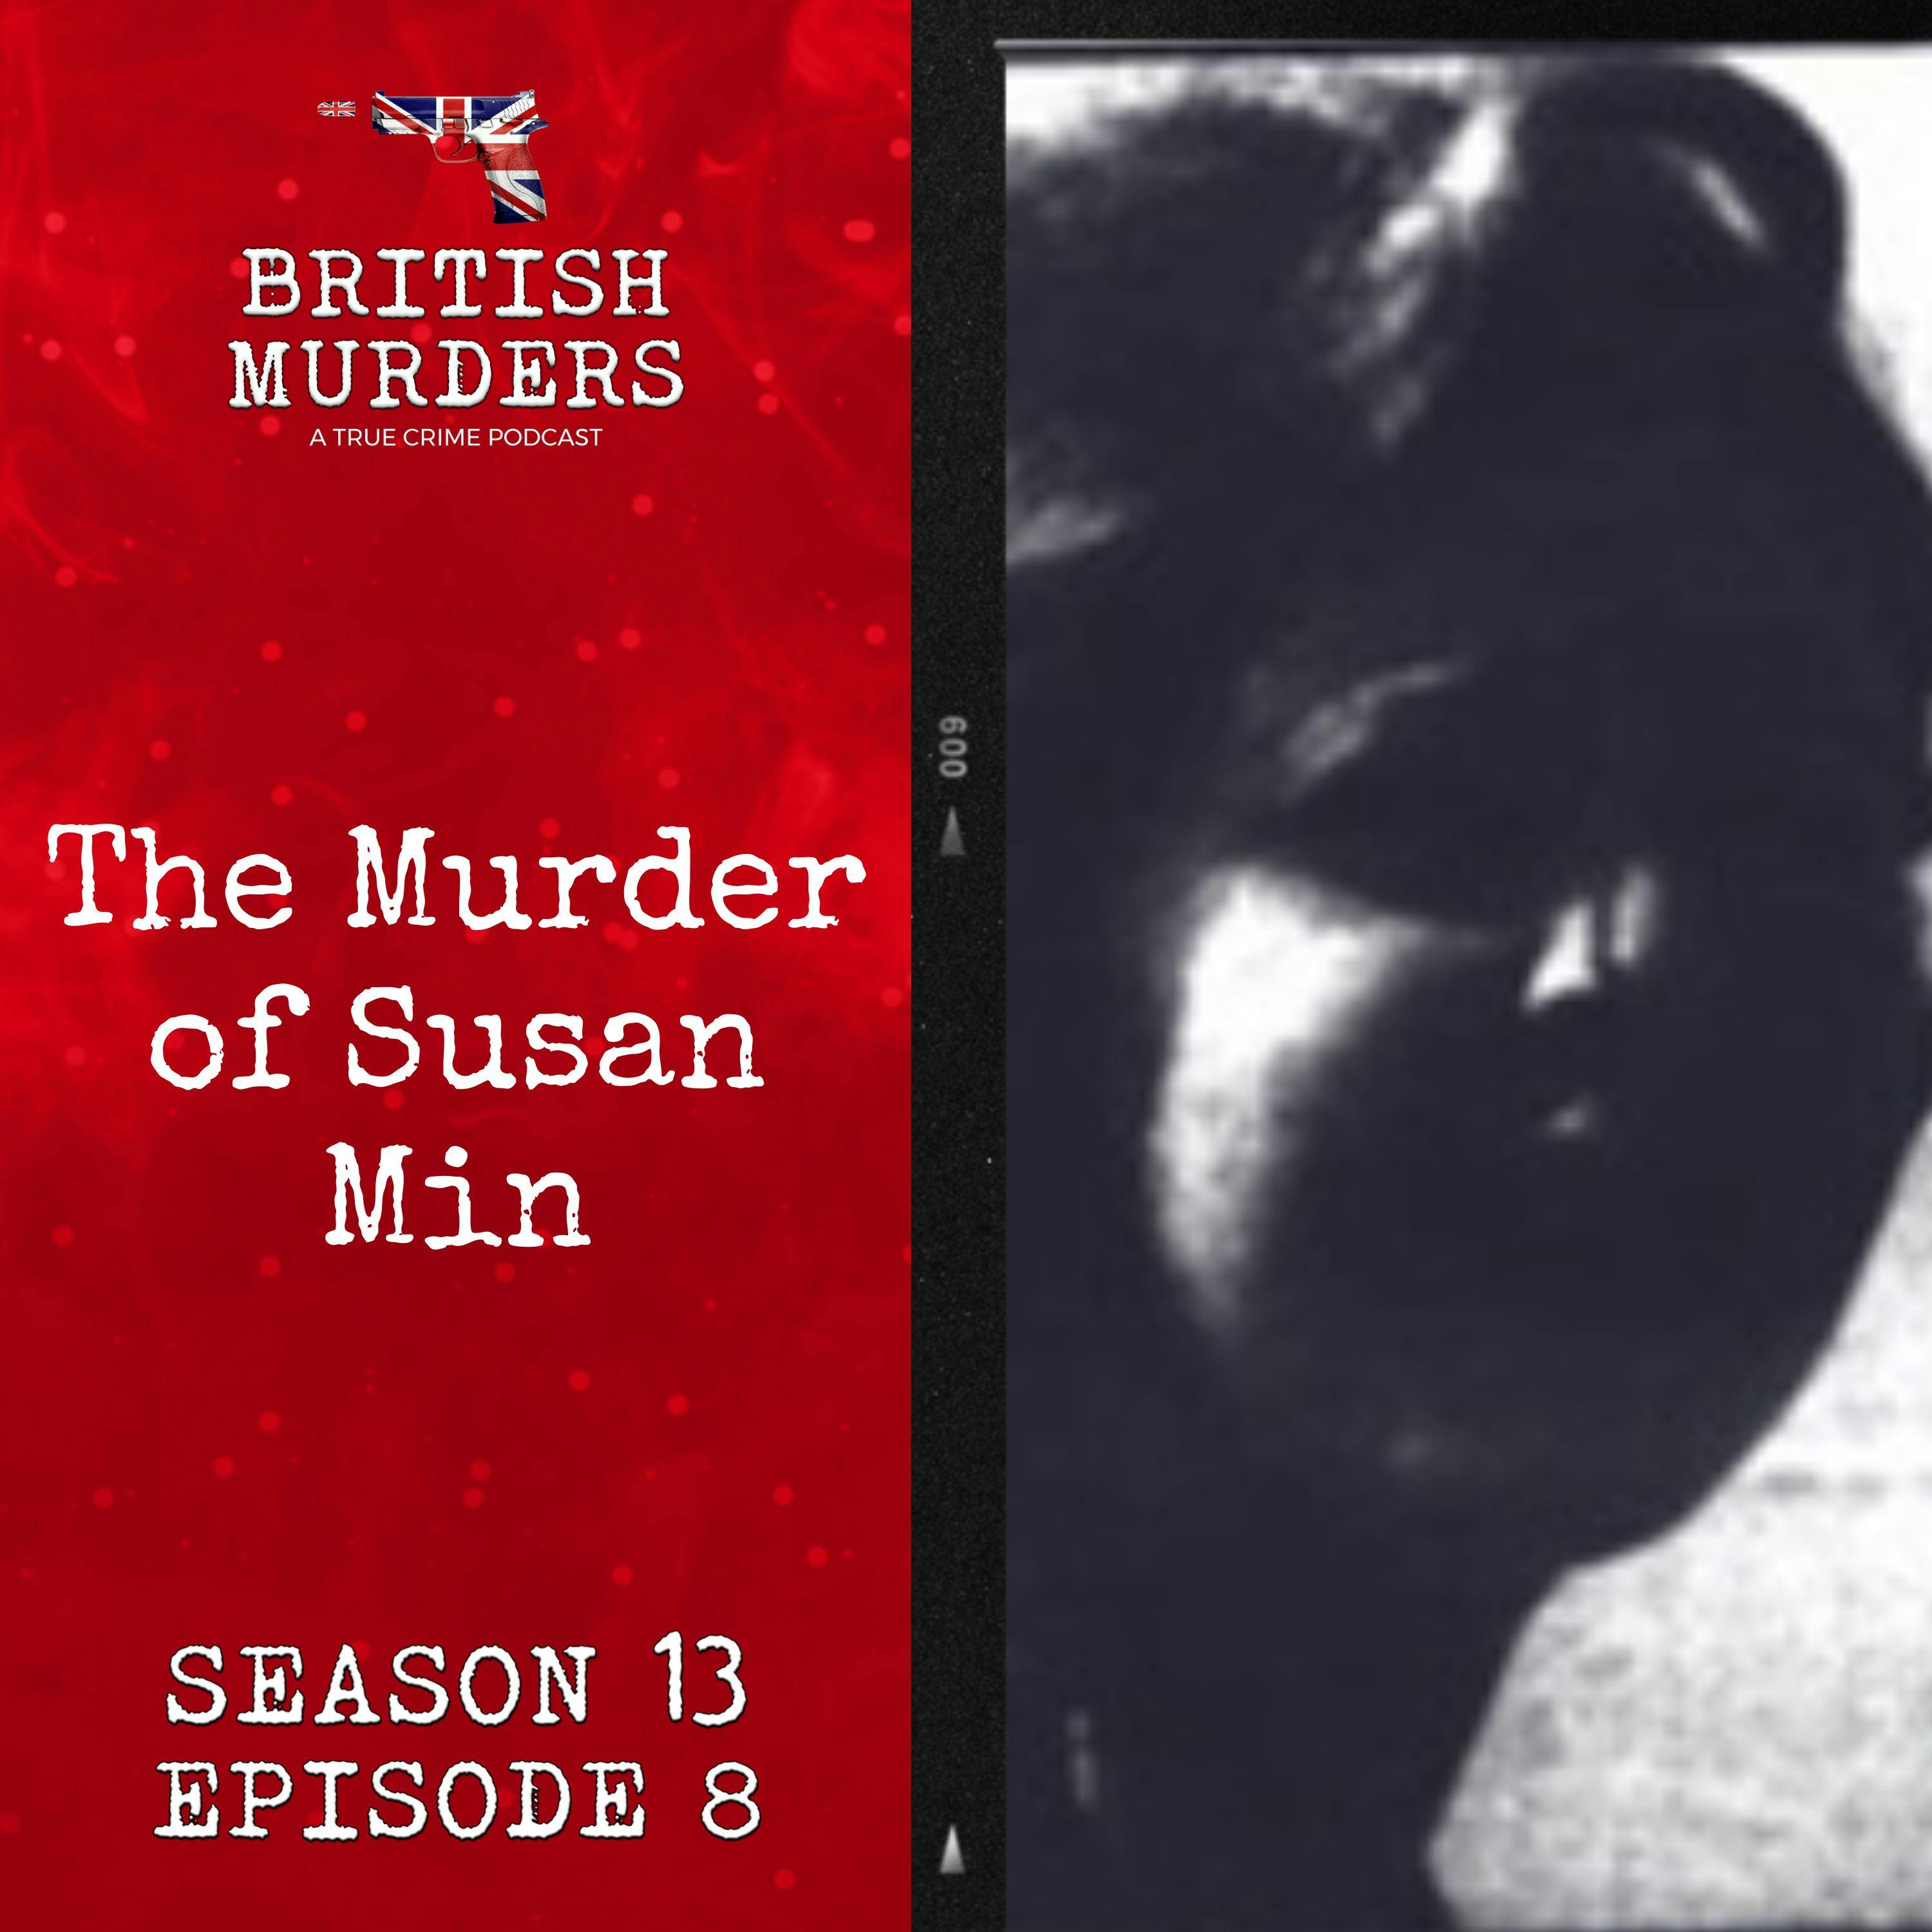 S13E08 | The Murder of Susan Min (Newcastle-under-Lyme, Staffordshire, 1986)